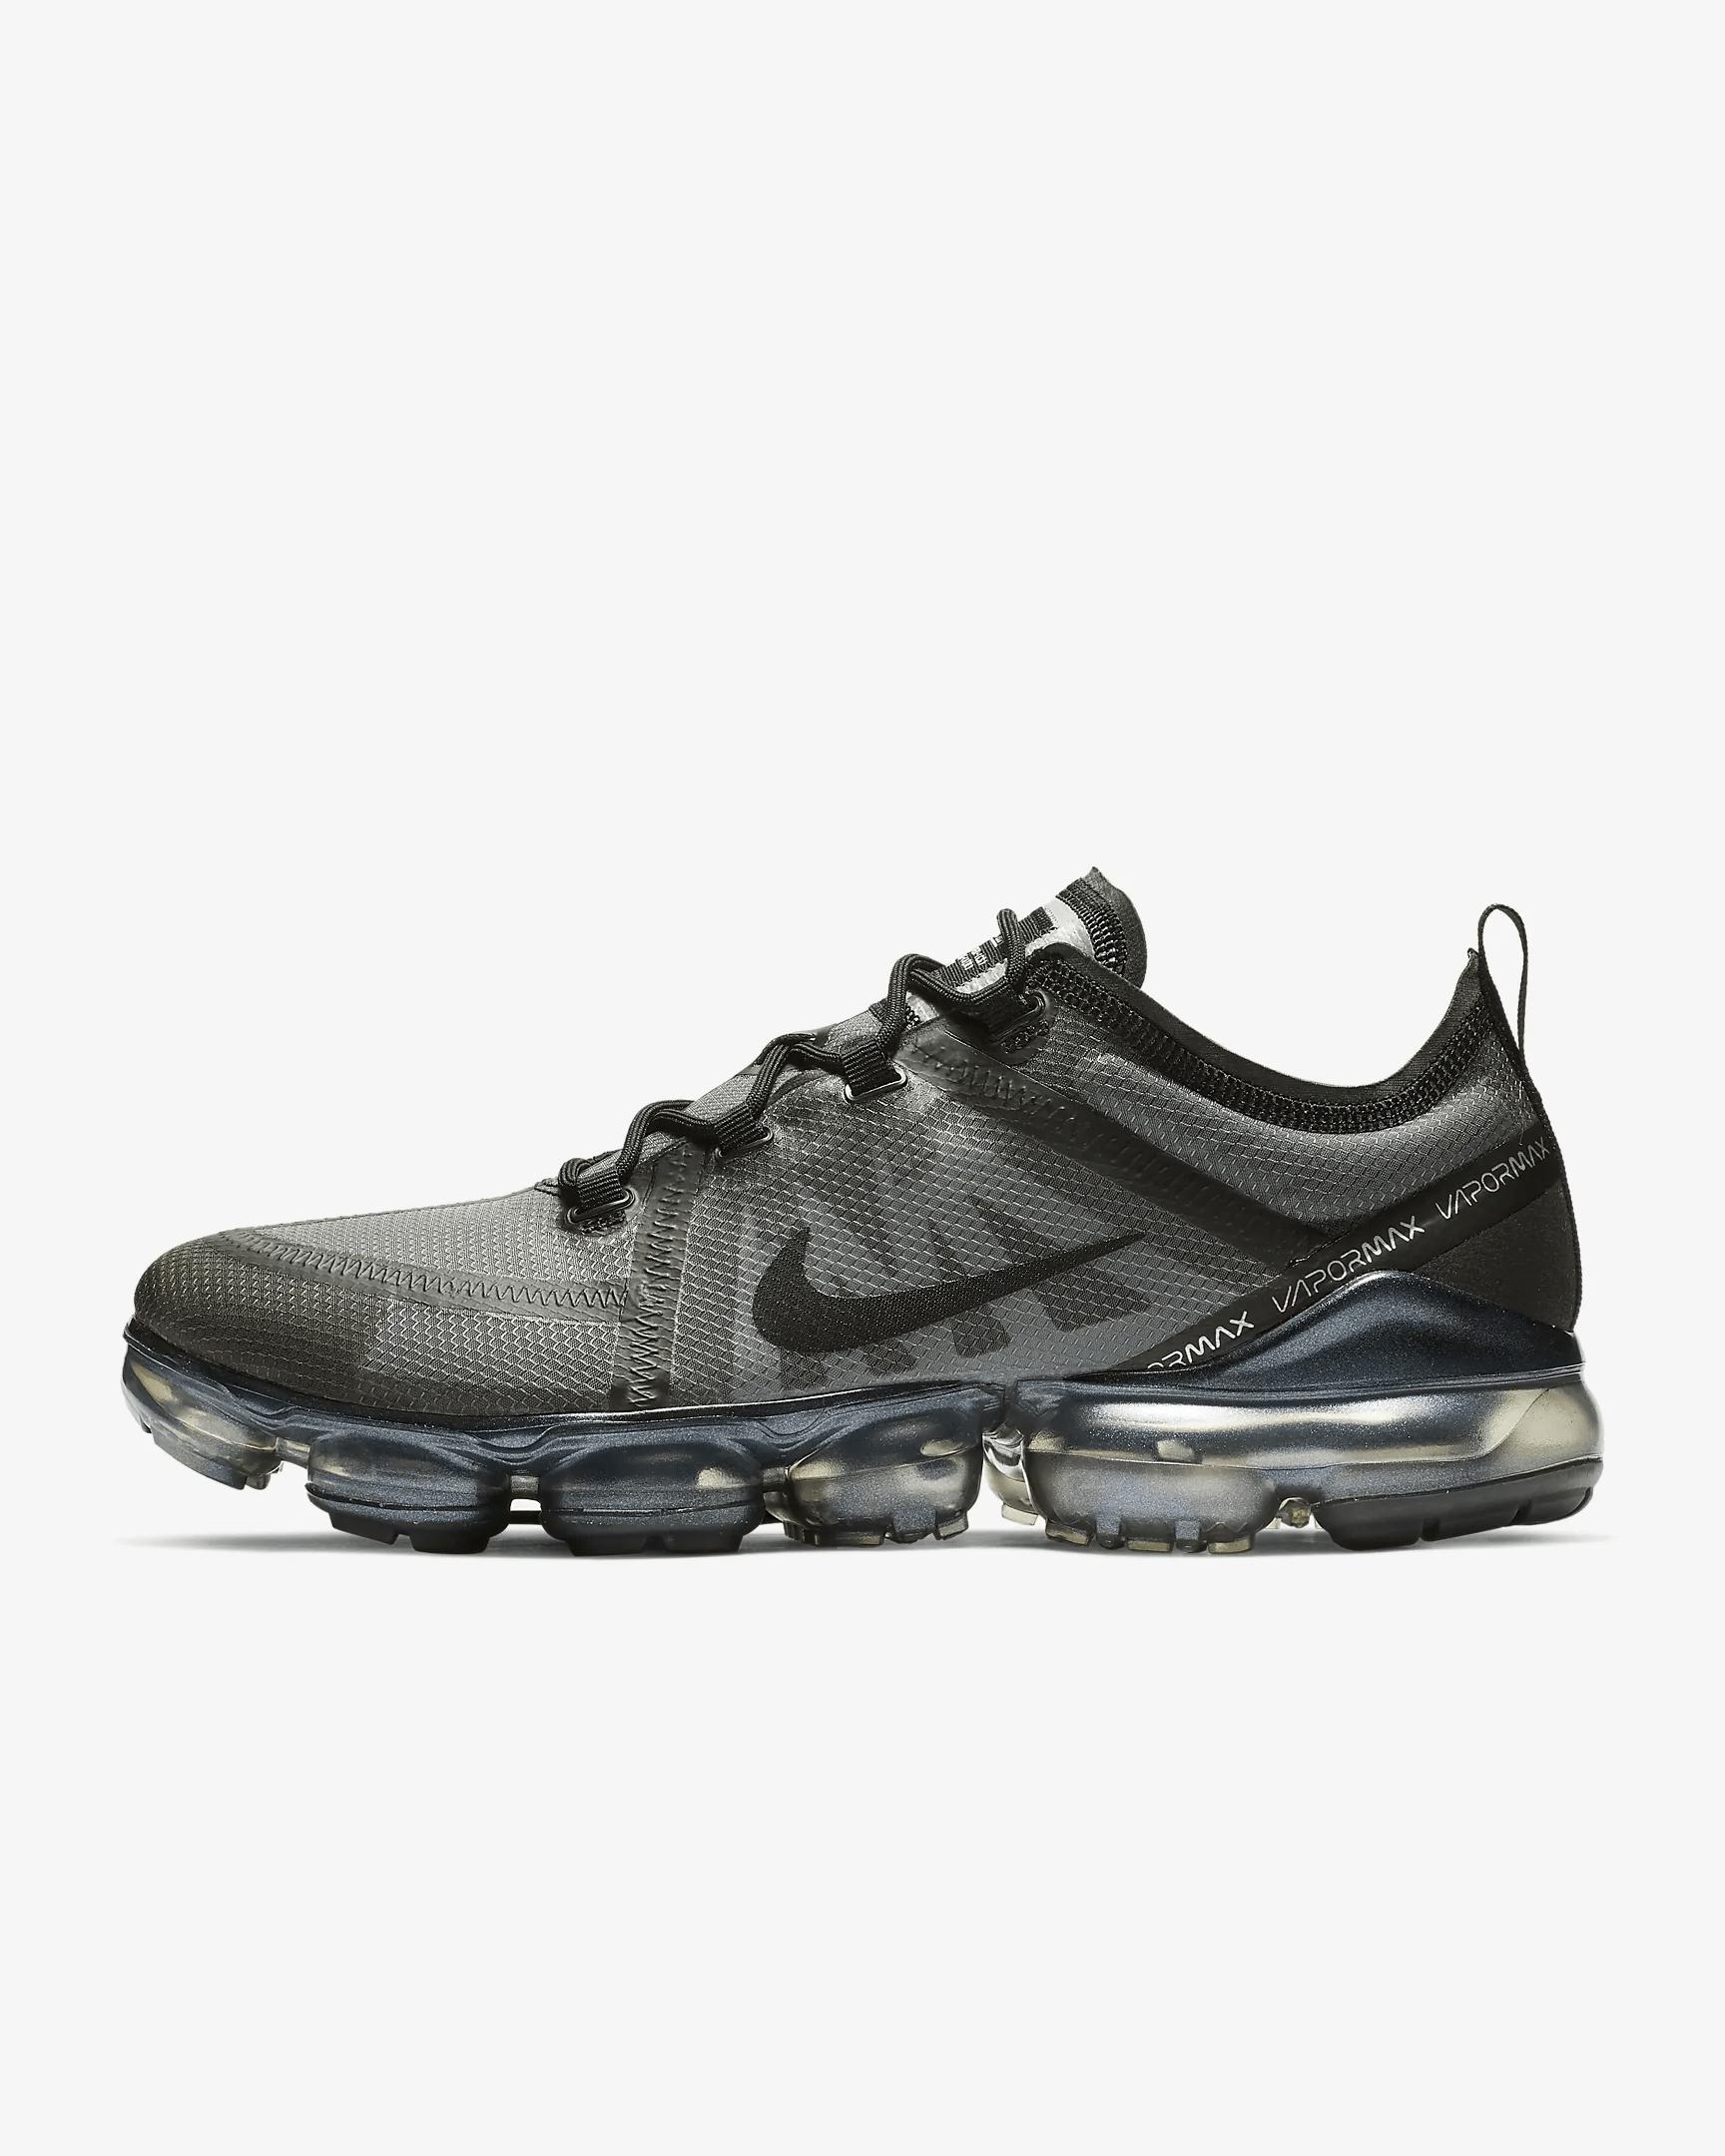 the new vapormax 2019